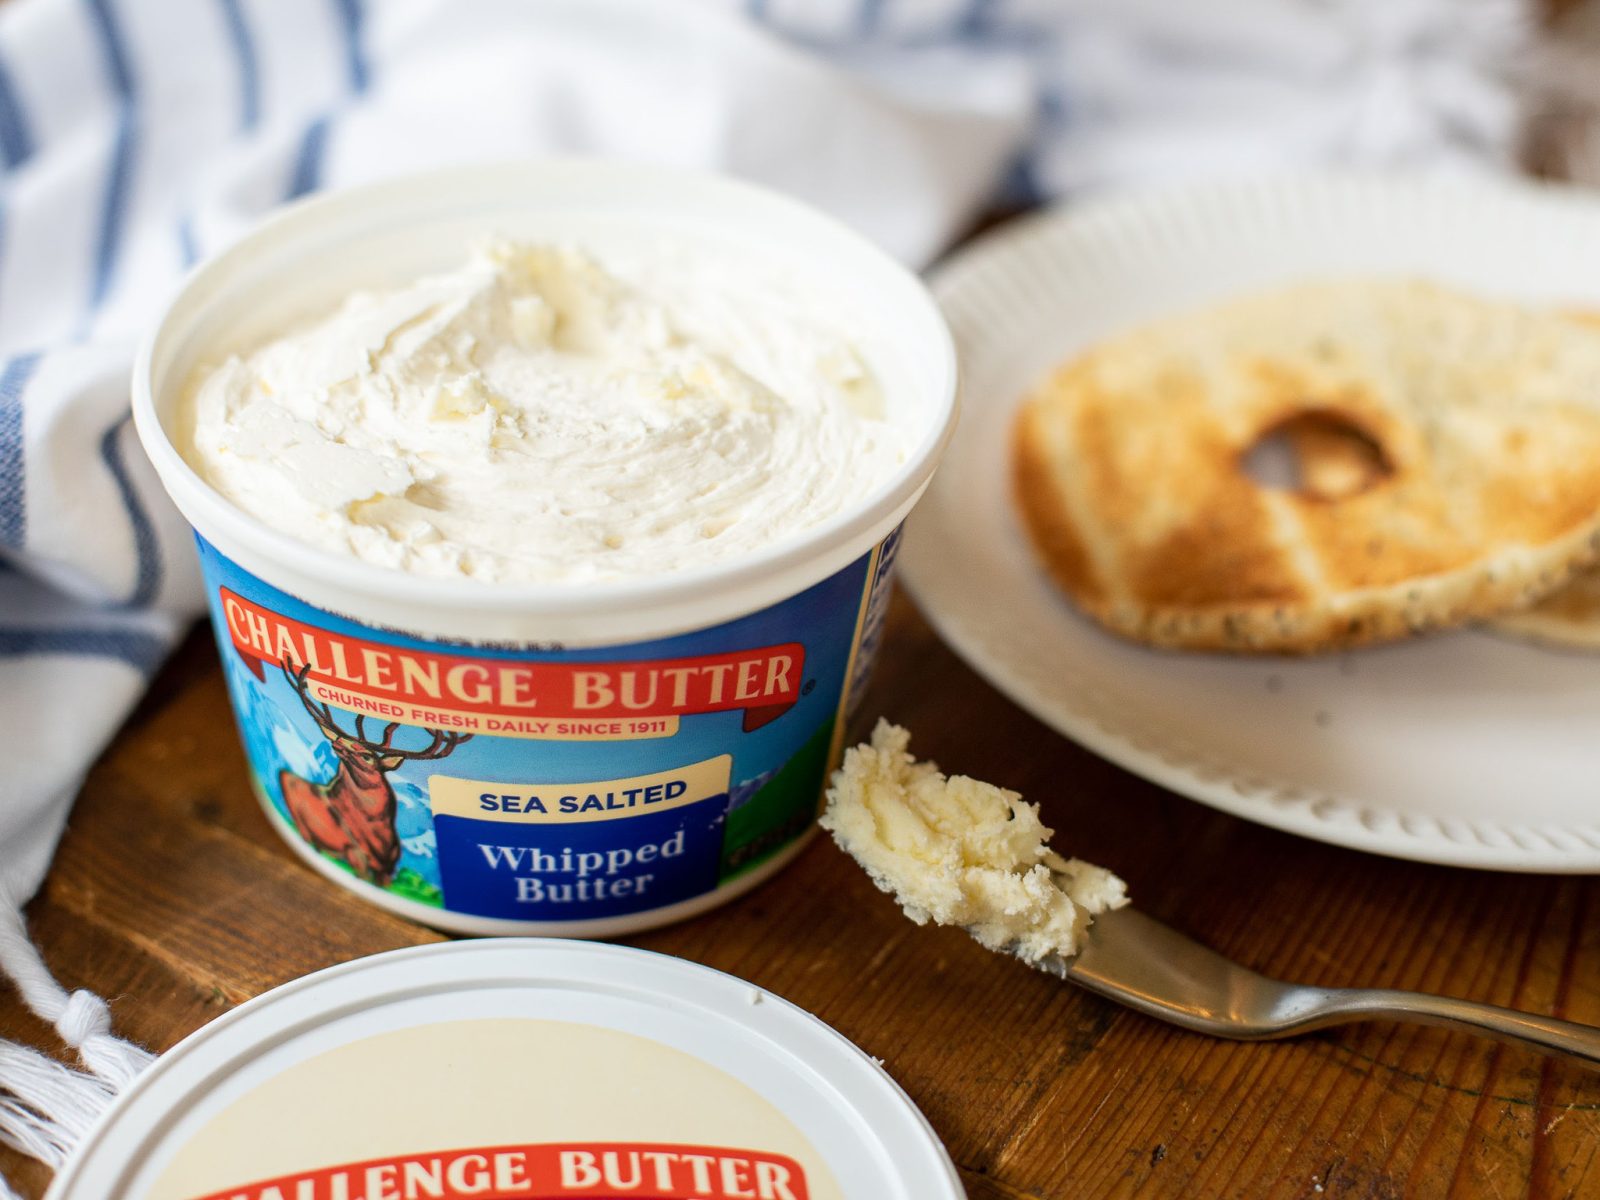 Challenge Sweet Cream Or Whipped Butter Just $3.50 At Publix